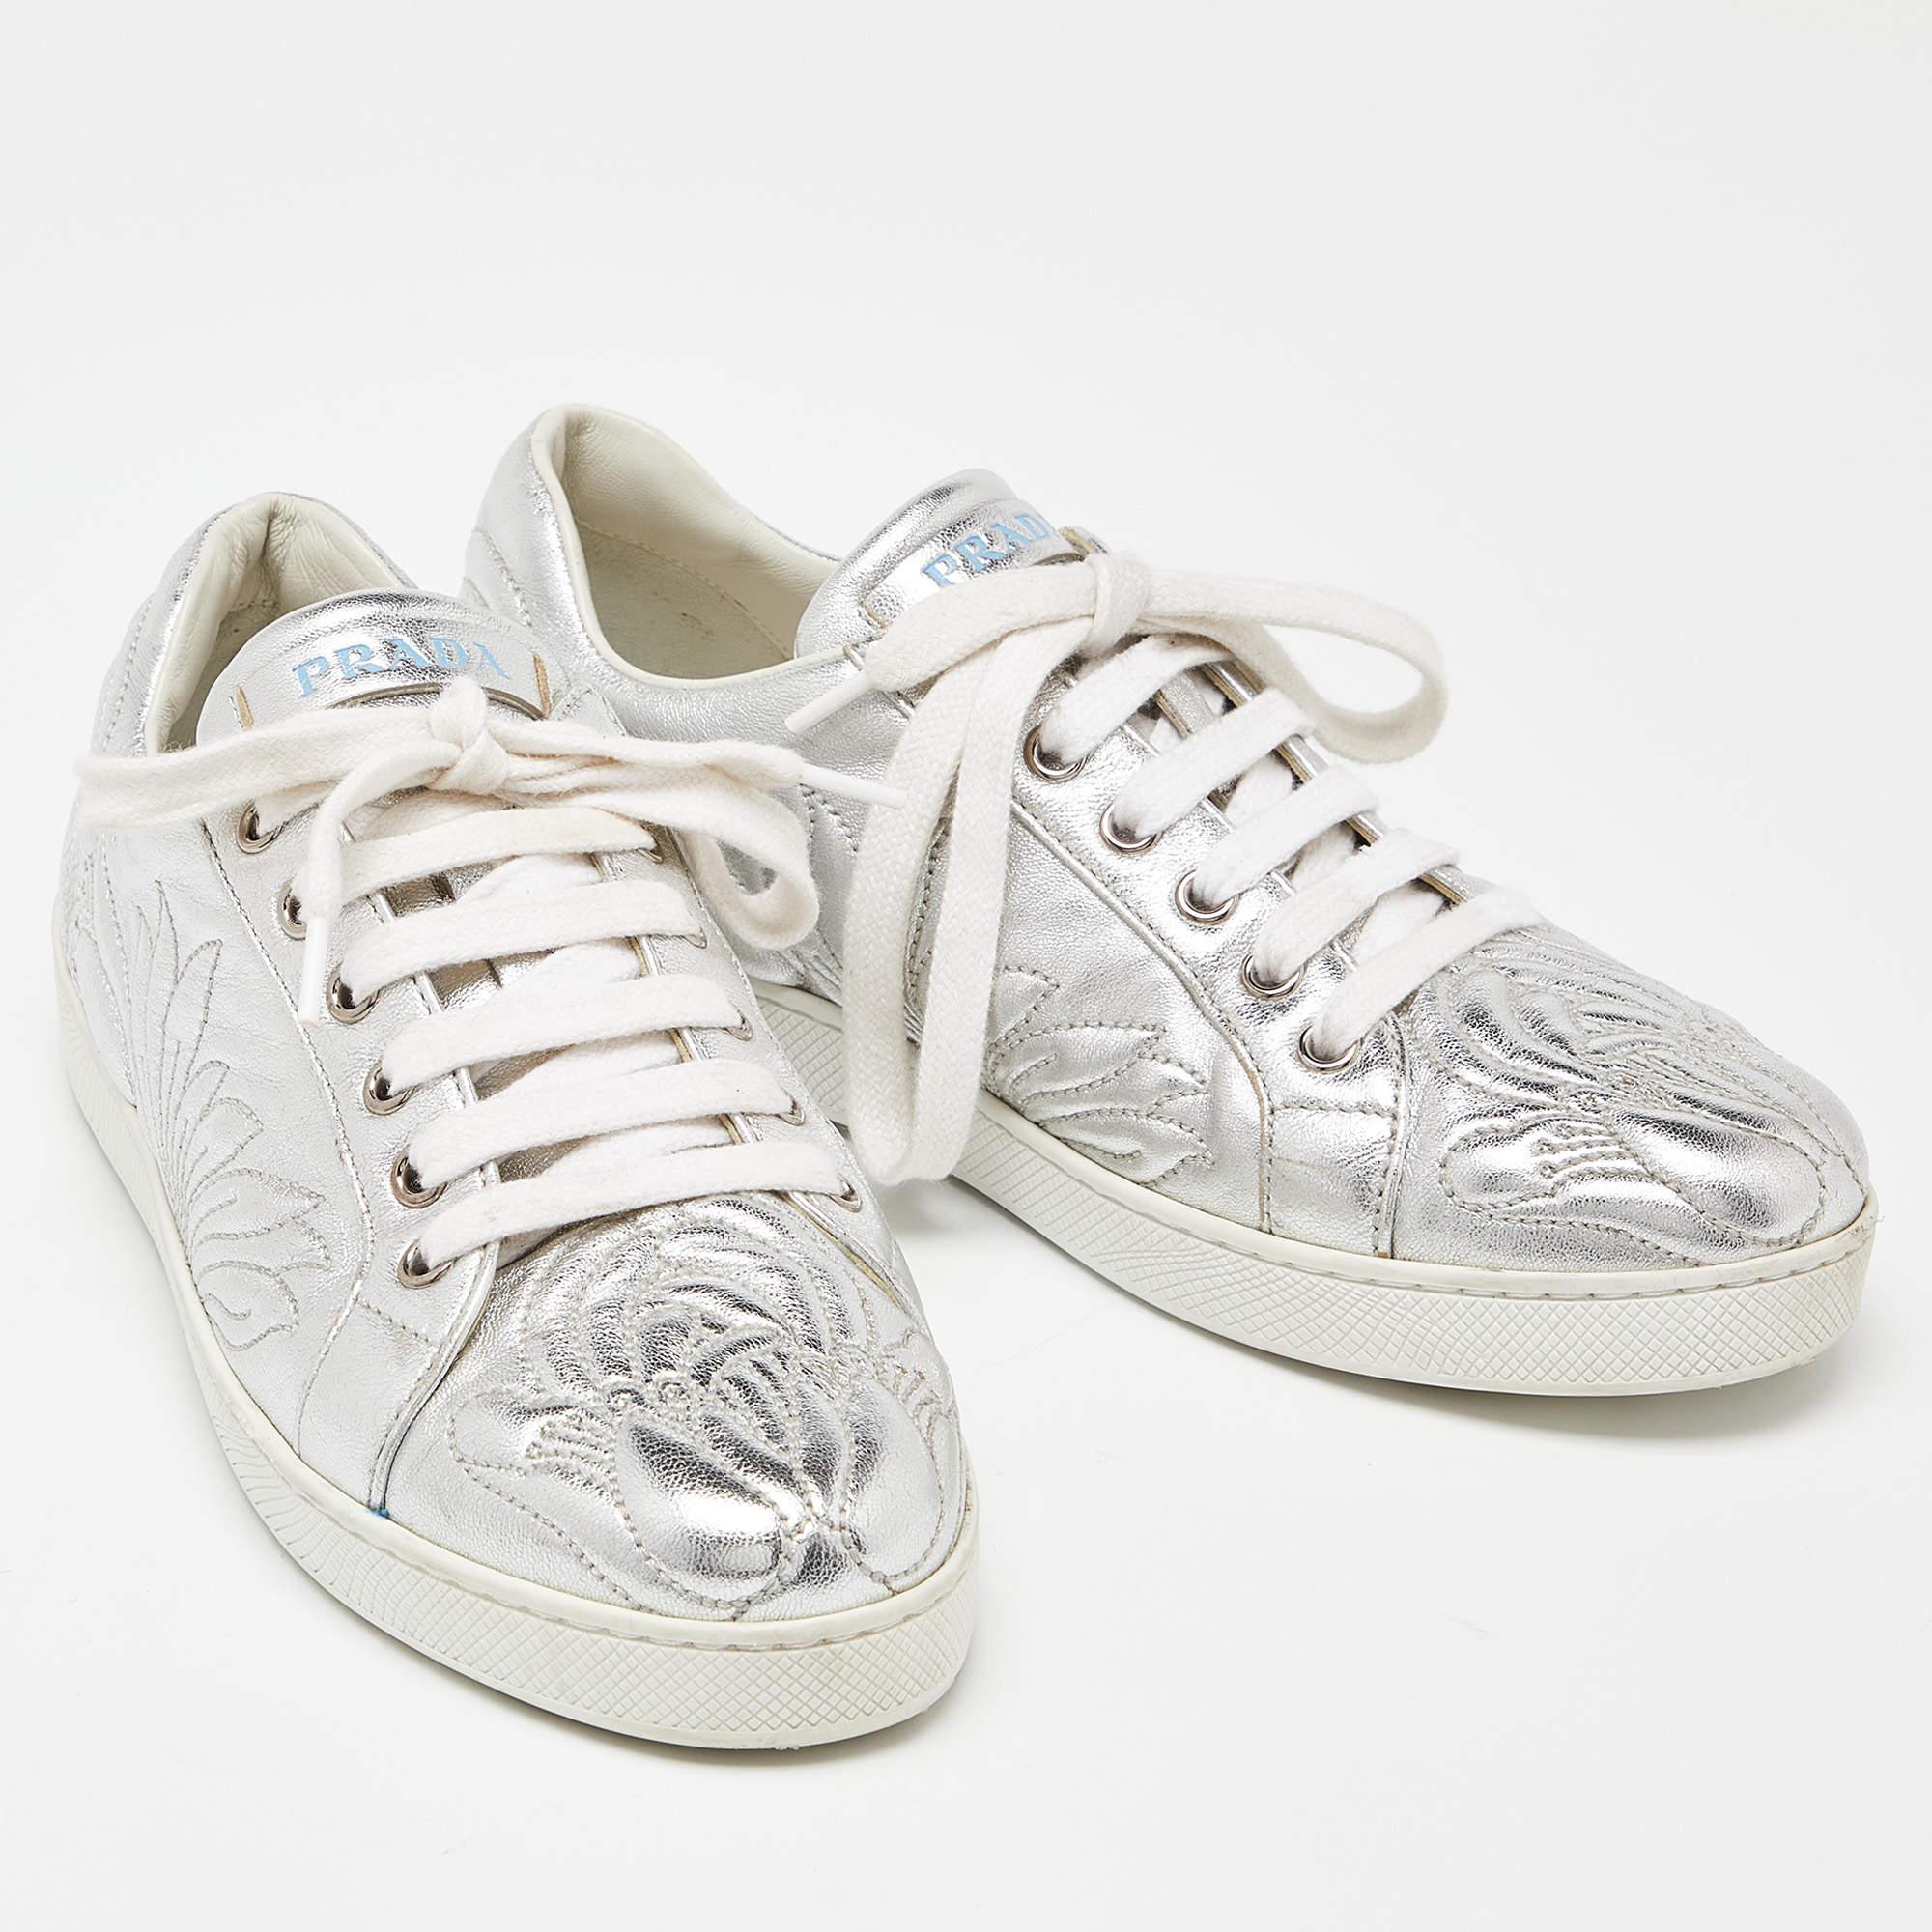 Prada Silver Embroidered Leather Low Top Sneakers Size 38 For Sale 1